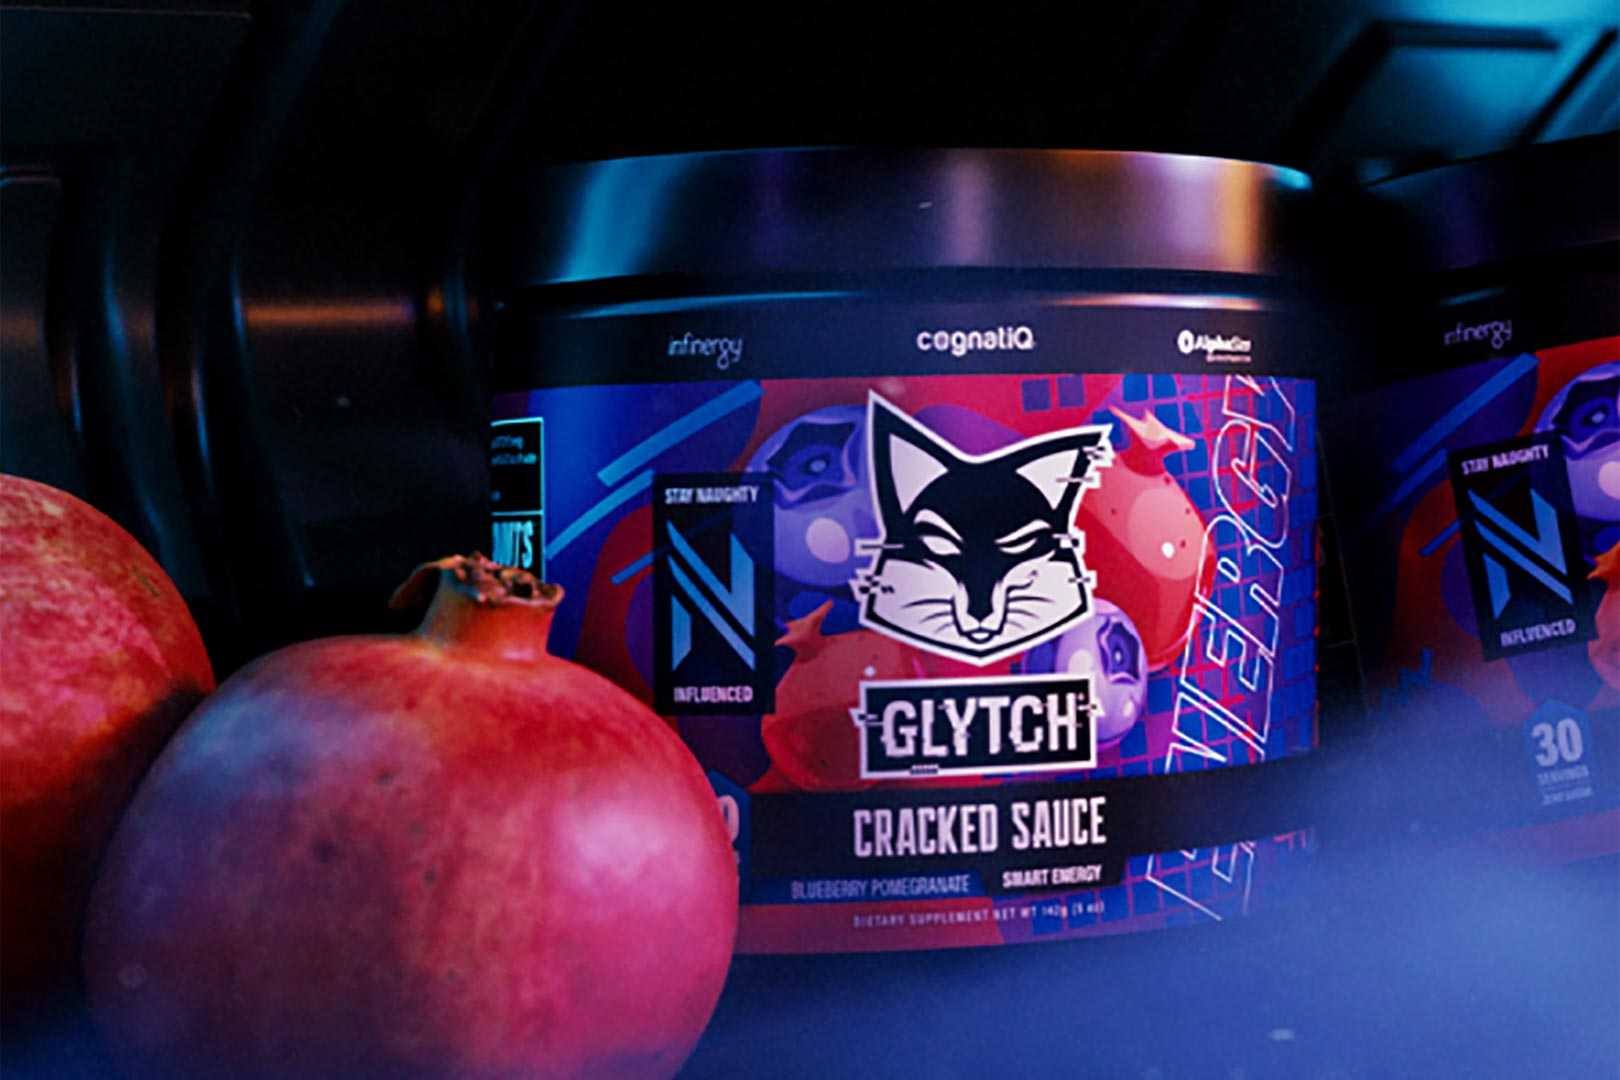 Glytch Stay Naughty Flavor Cracked Sauce